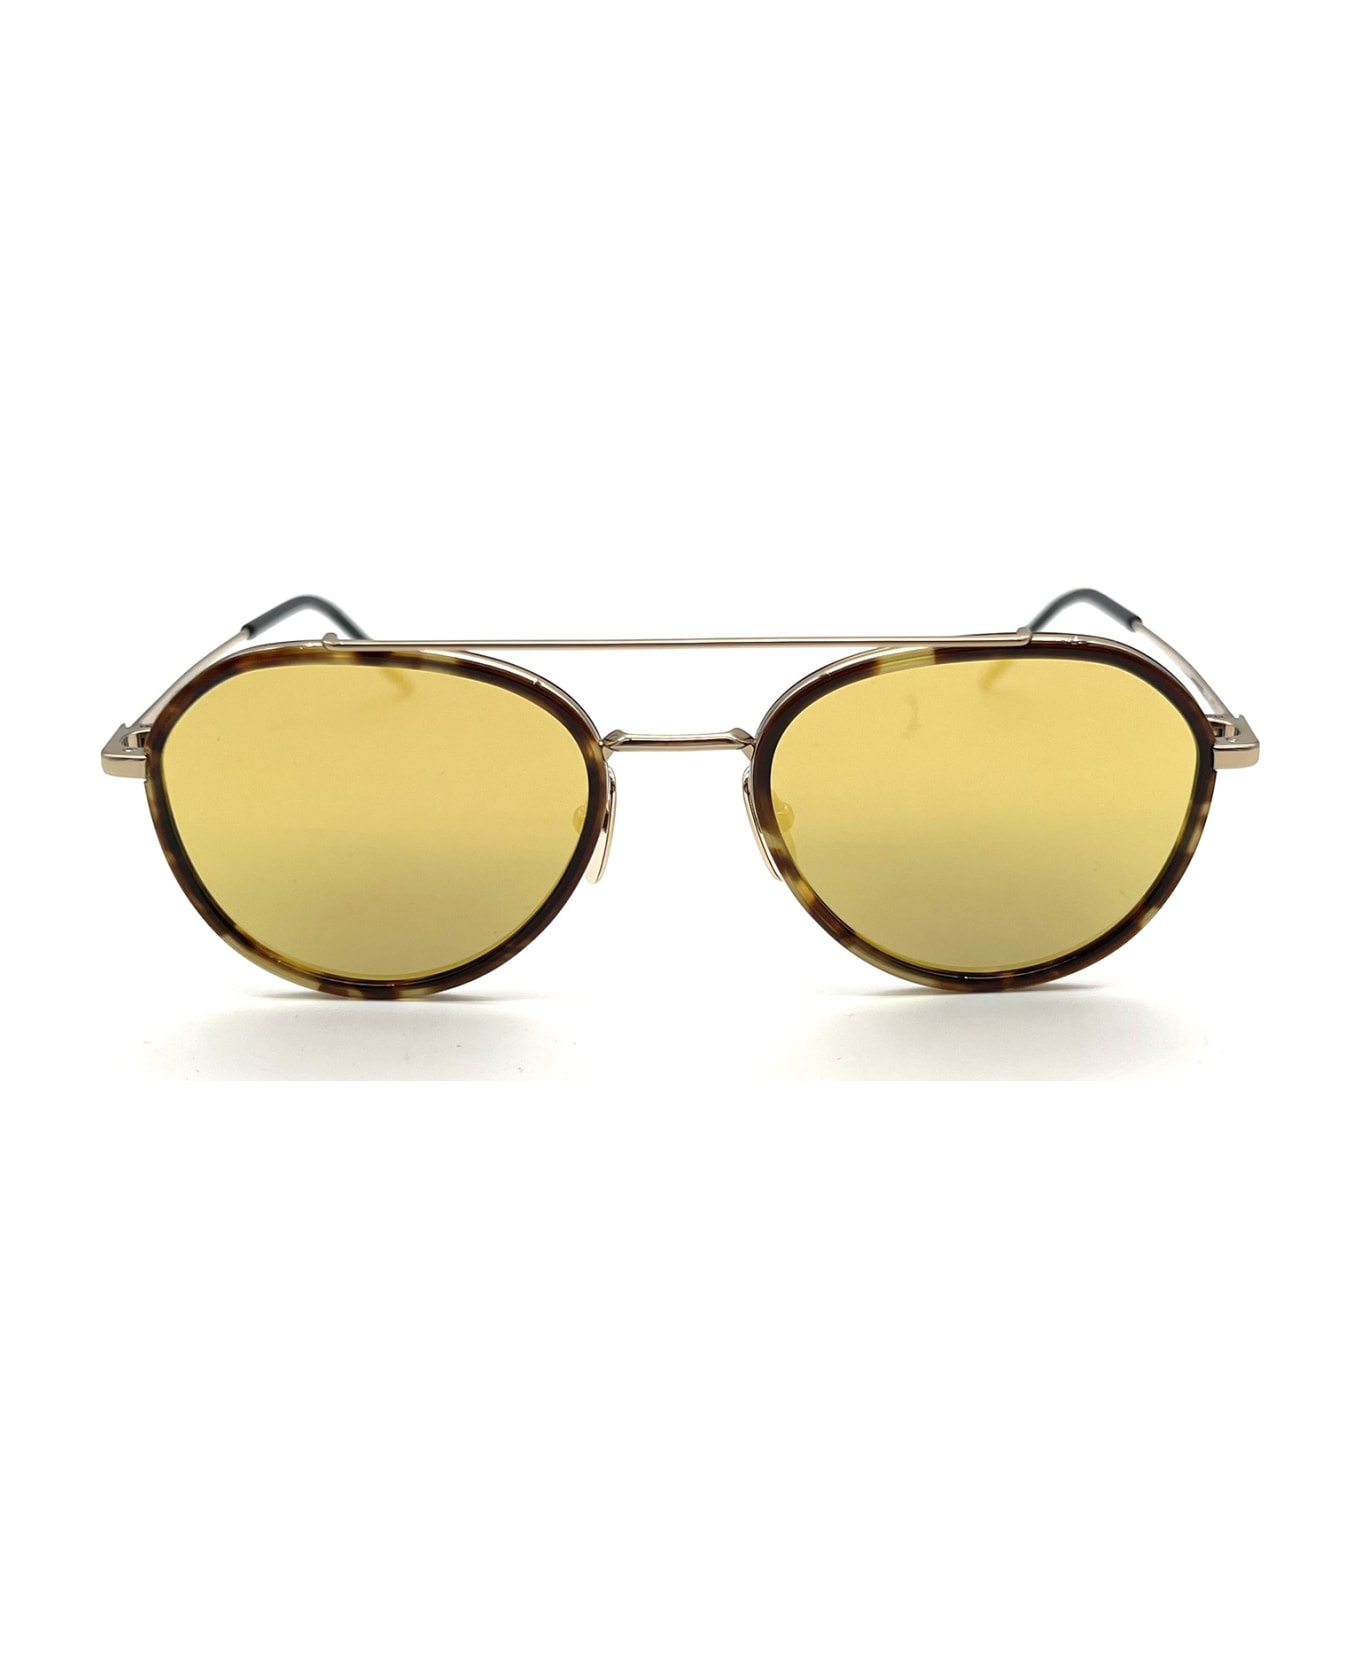 Thom Browne UES801A/G0003 Sunglasses - Med Brown サングラス